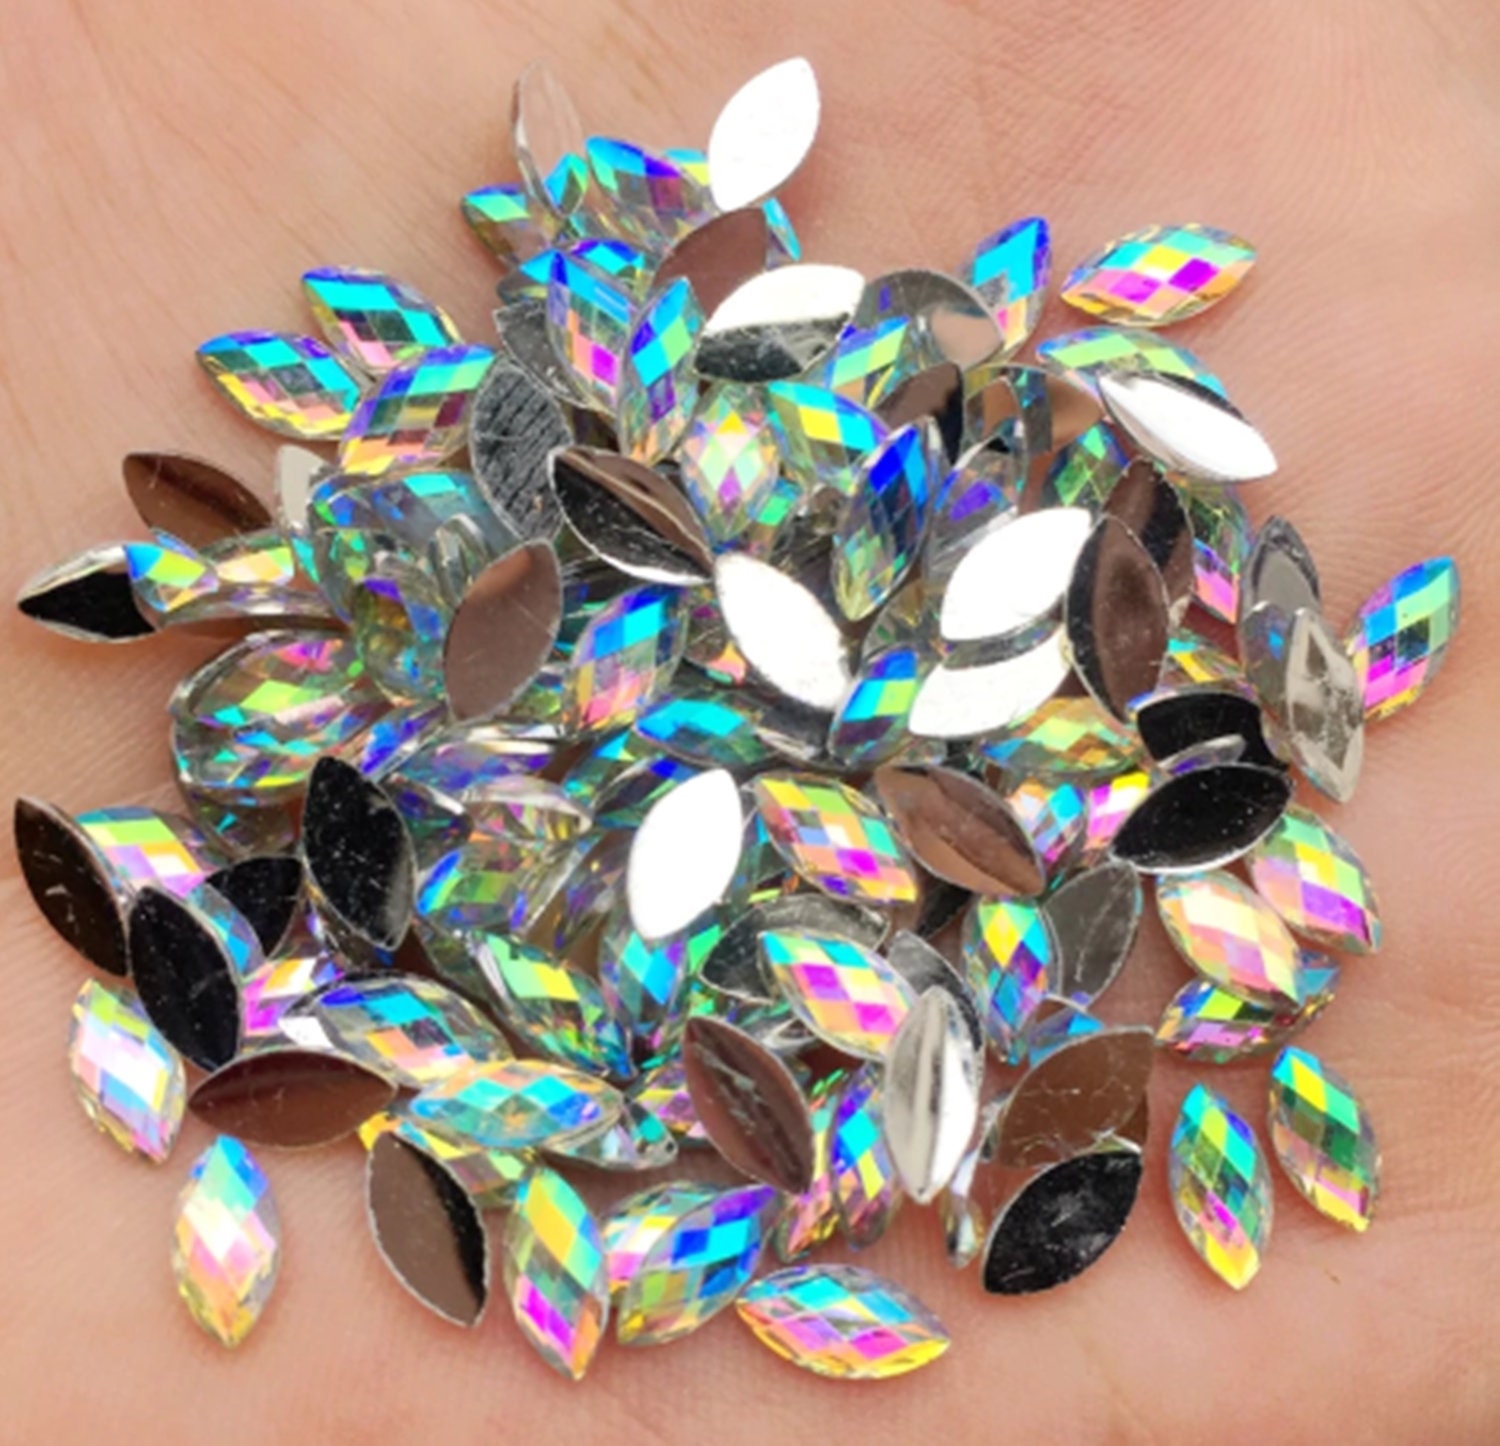 Horse Eye Crystal Sew on Rhinestones Flatback Rhinestones for Clothes Crafts Sewing Beads Decorations K9 Glass (9x18mm 36pcs)